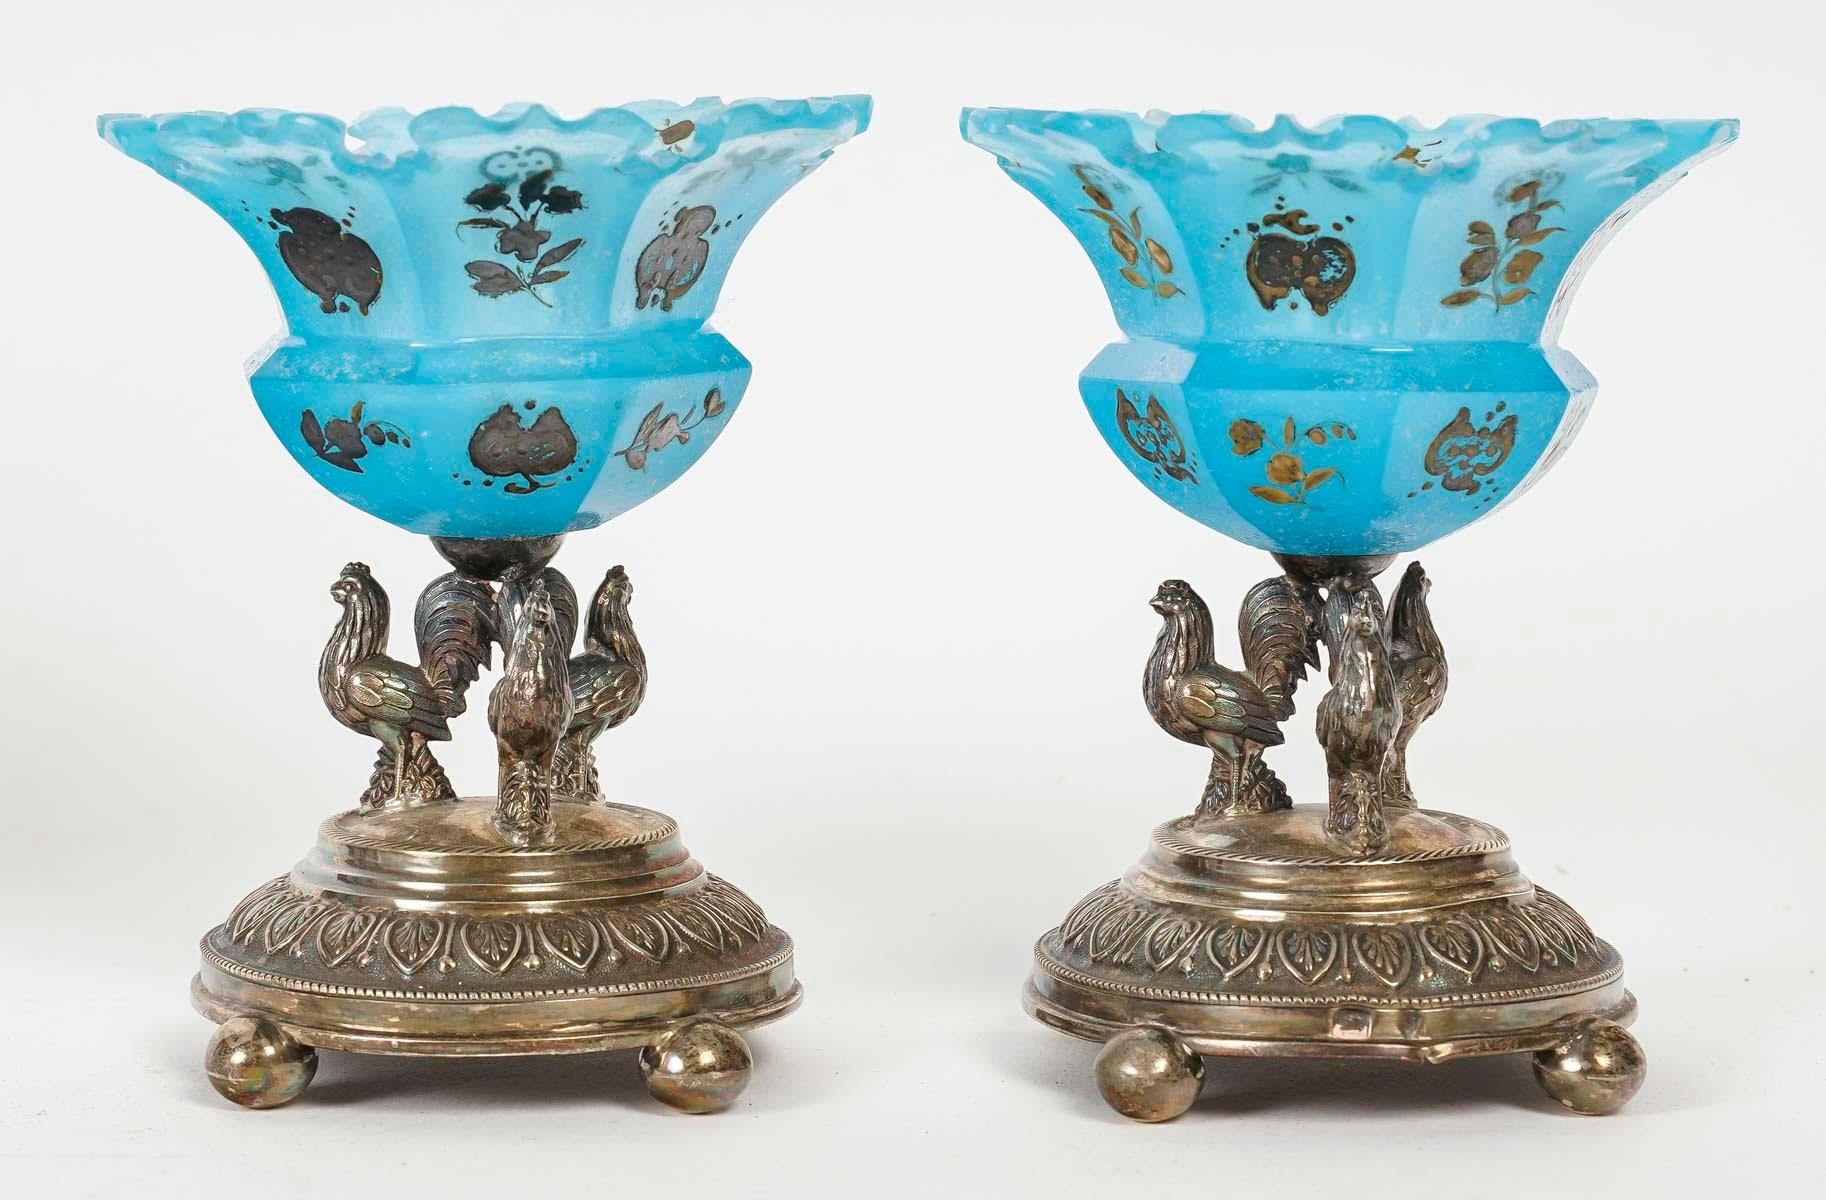 Jam set in blue enamelled opaline and silver plated metal, 19th century.

Jam set, 19th century, Napoleon III period, in blue enamelled opaline and silver-plated metal.
Cup: h: 10cm, d: 8cm
Spoon holder: h: 16cm, w: 10cm, d: 6.5cm